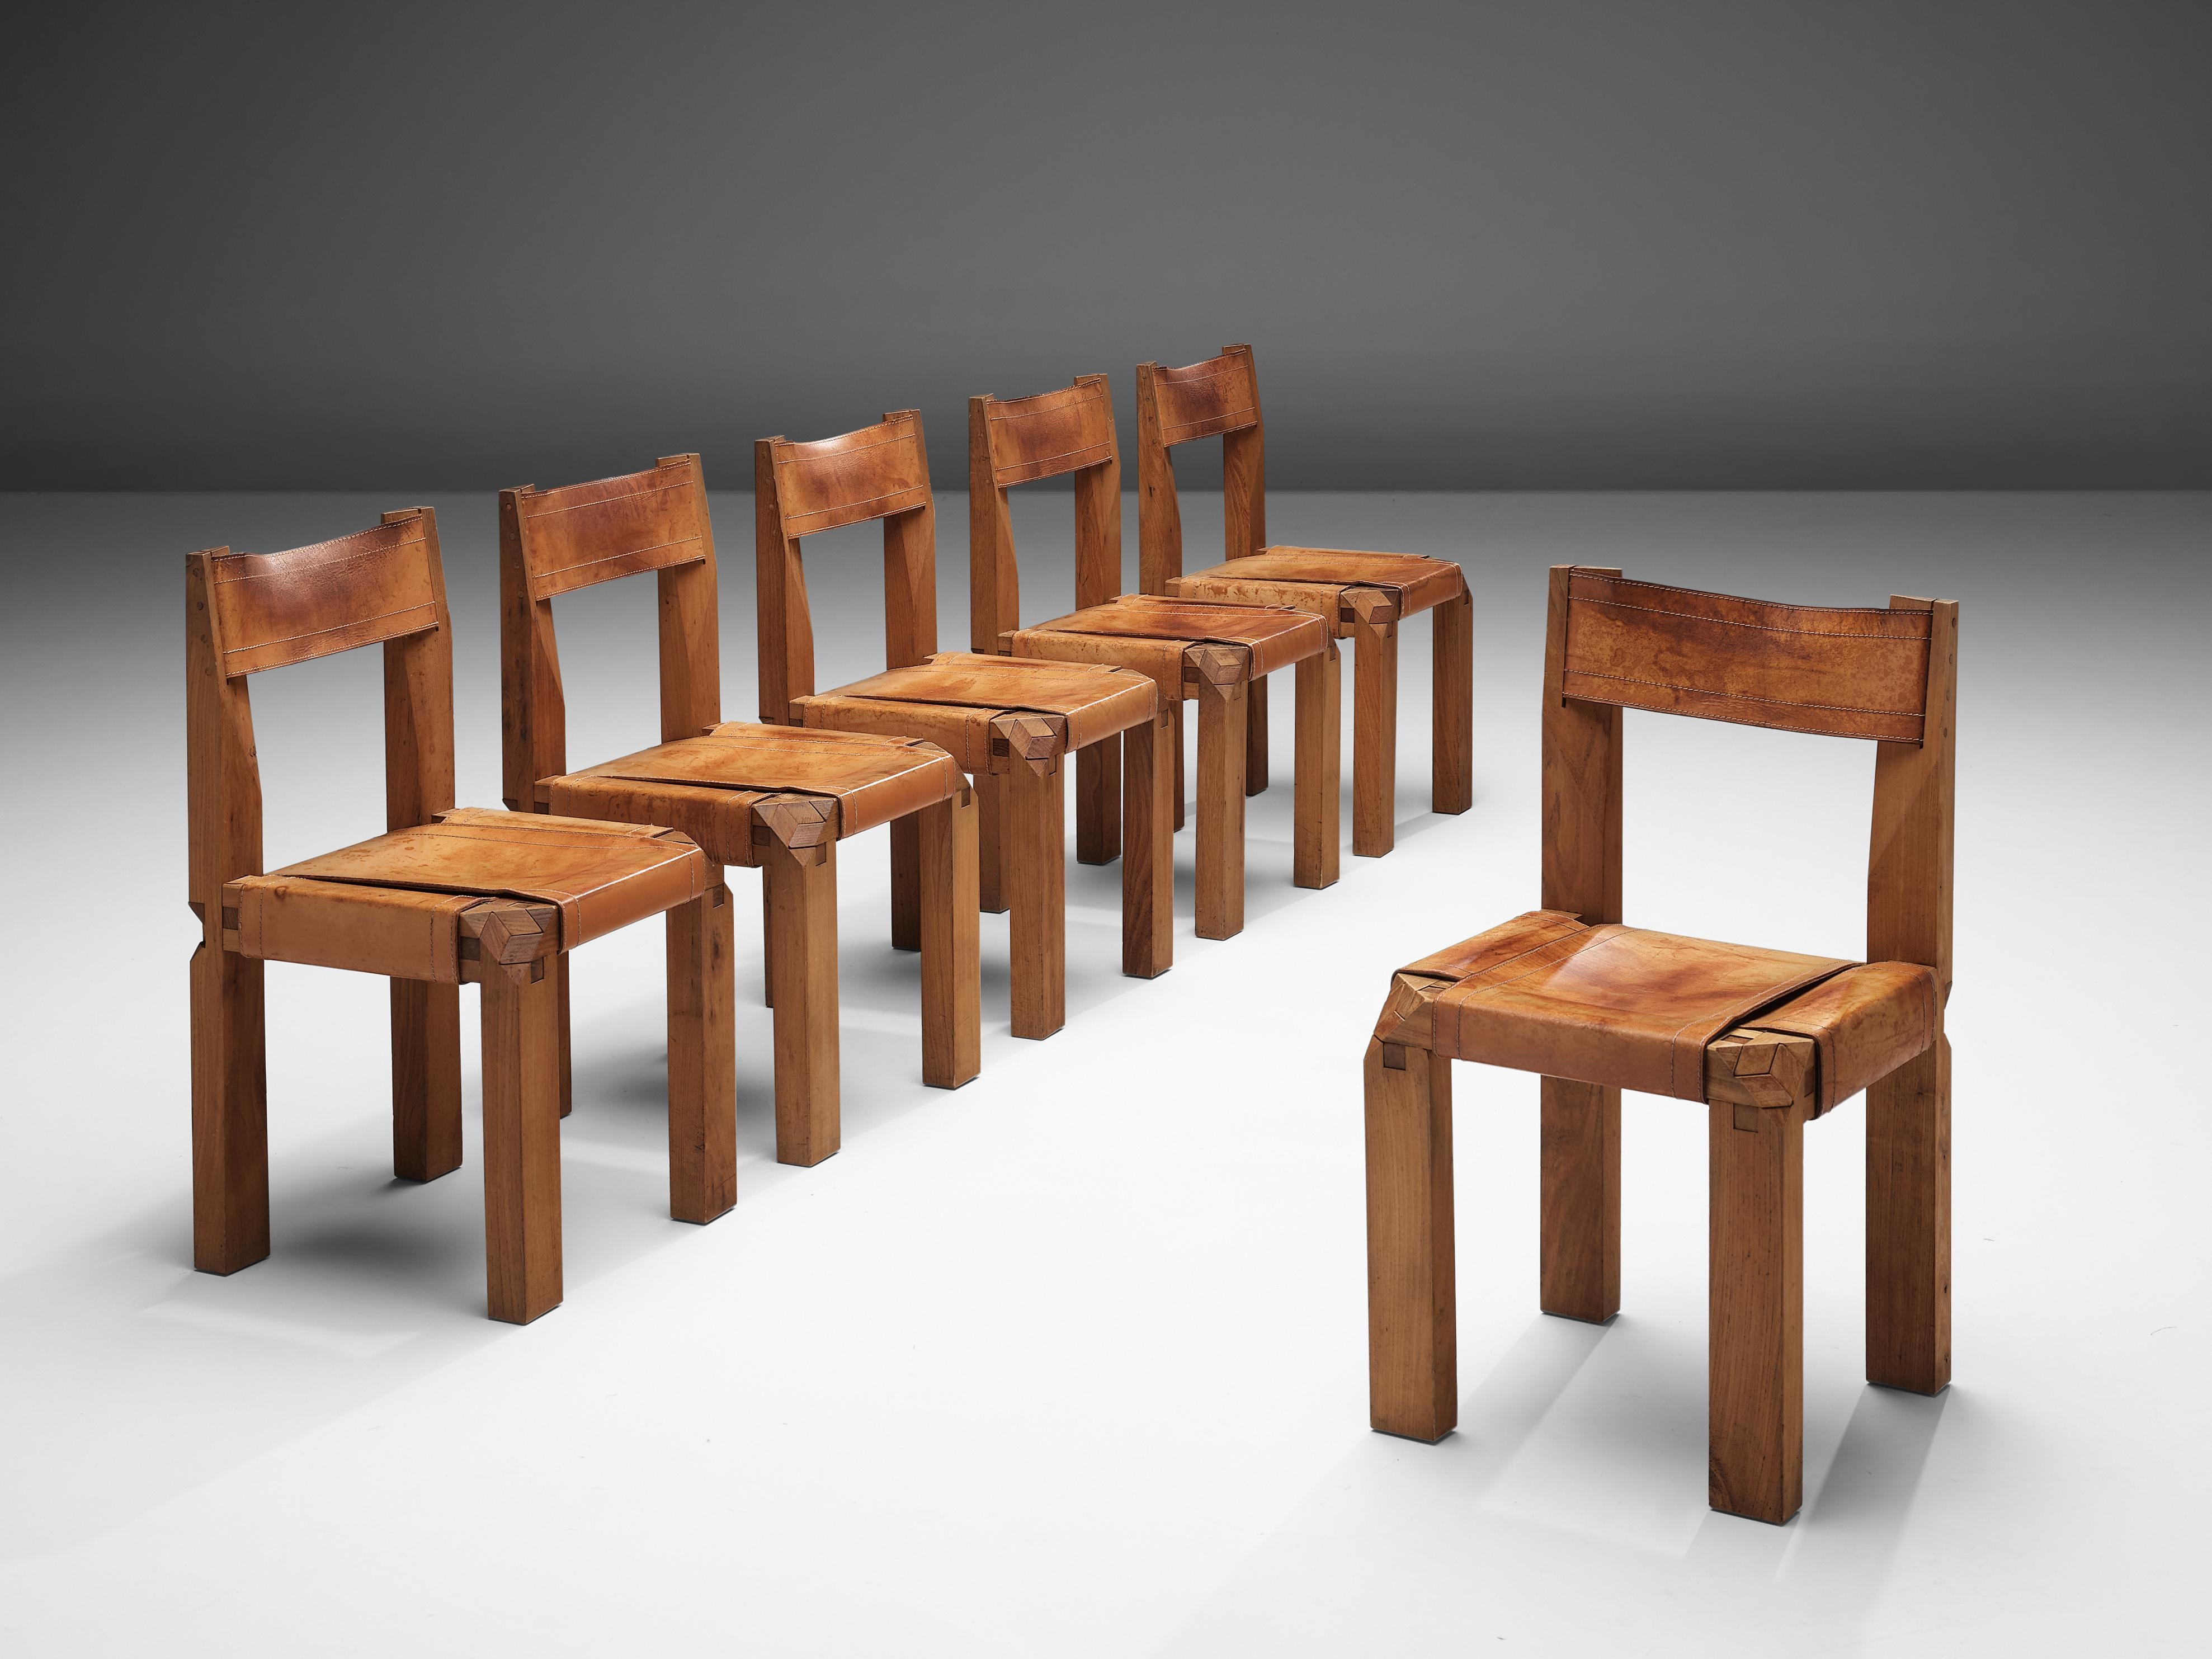 Pierre Chapo, dining chairs model 'S11', elm, leather, France, circa 1966.

This design is an early edition, created according to the original craft methodology of Pierre Chapo. Set of six chairs in solid elmwood with cognac leather seating and